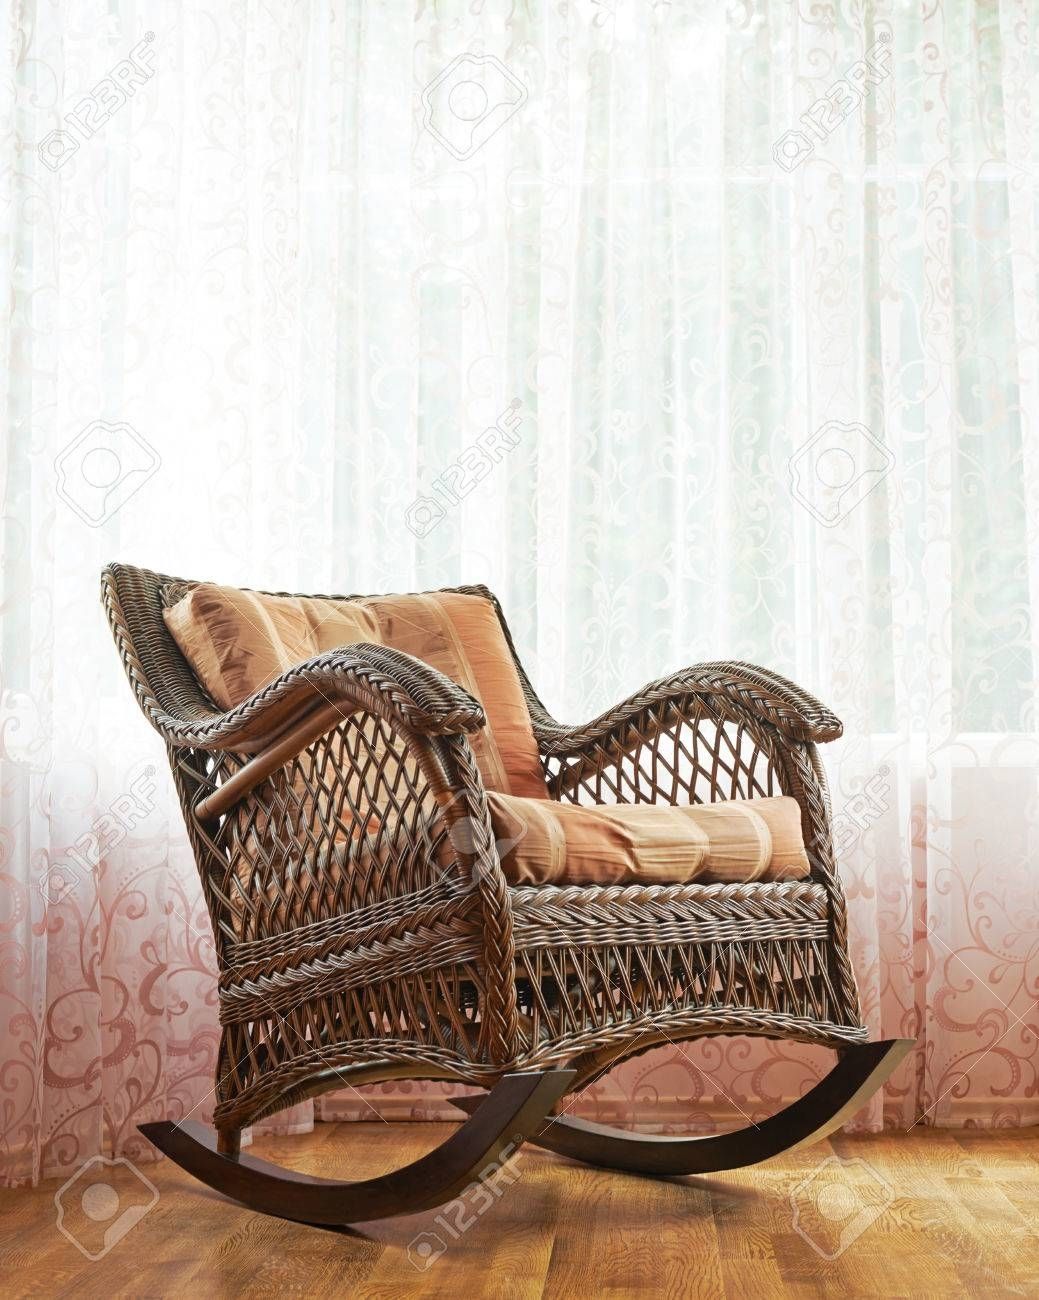 Brown Wicker Rocking Chair Against The Window's Curtains, Indoor Regarding Indoor Wicker Rocking Chairs (View 3 of 15)